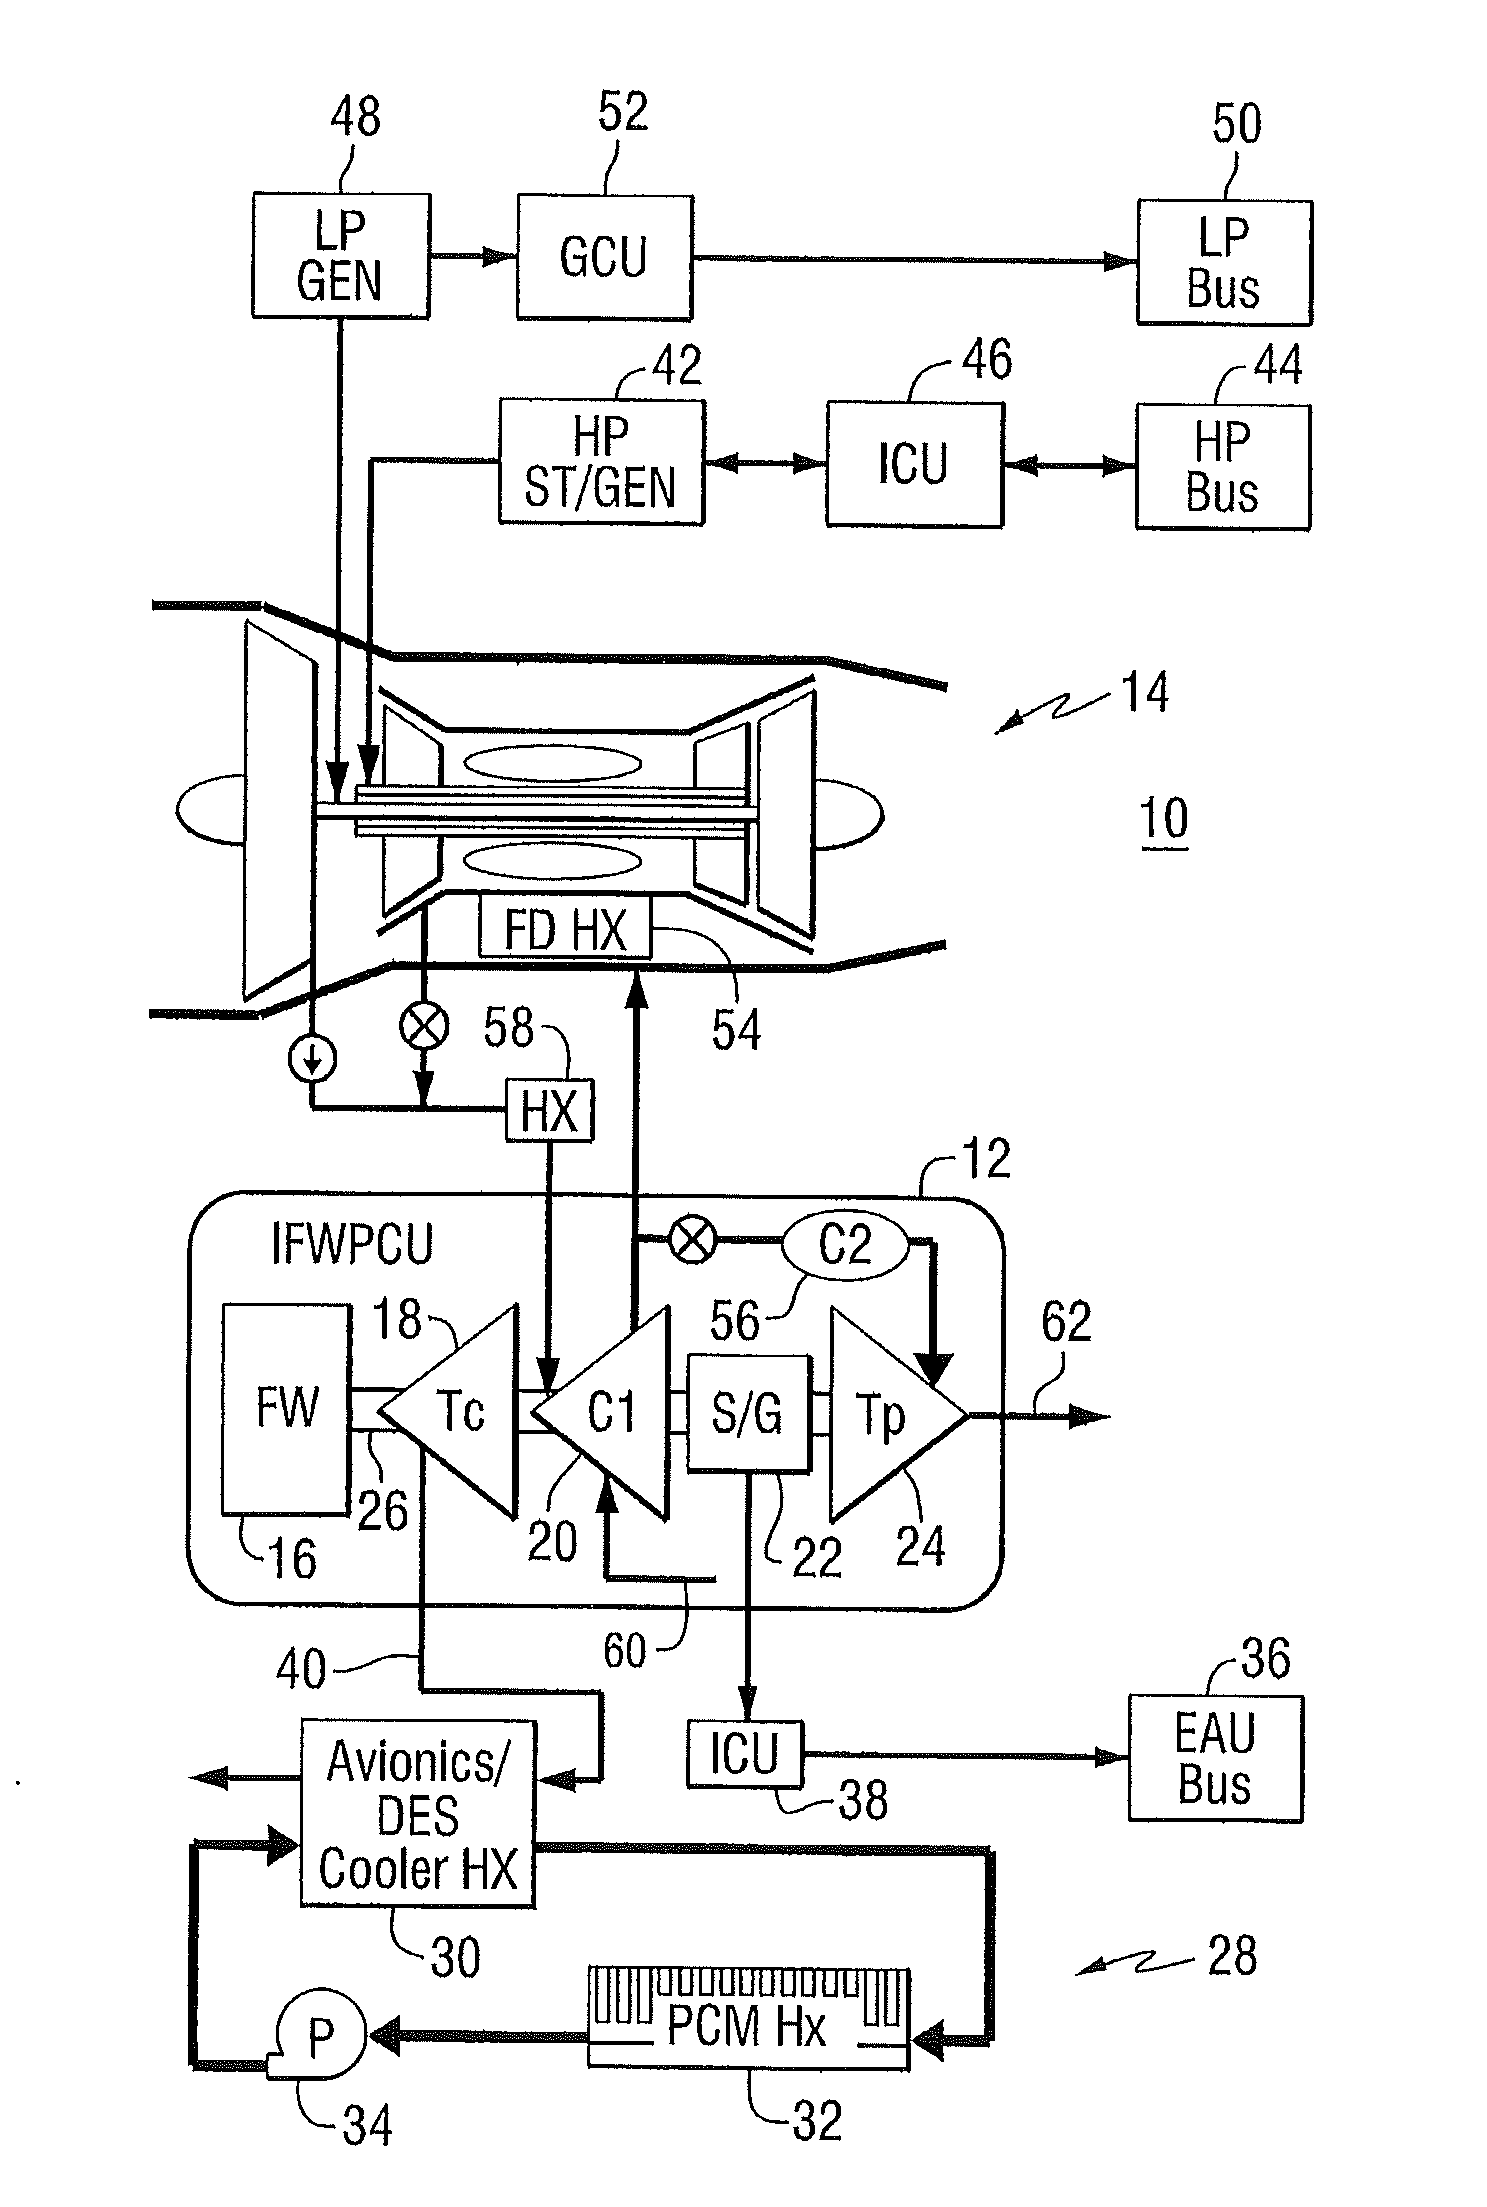 Apparatus for aircraft with high peak power equipment